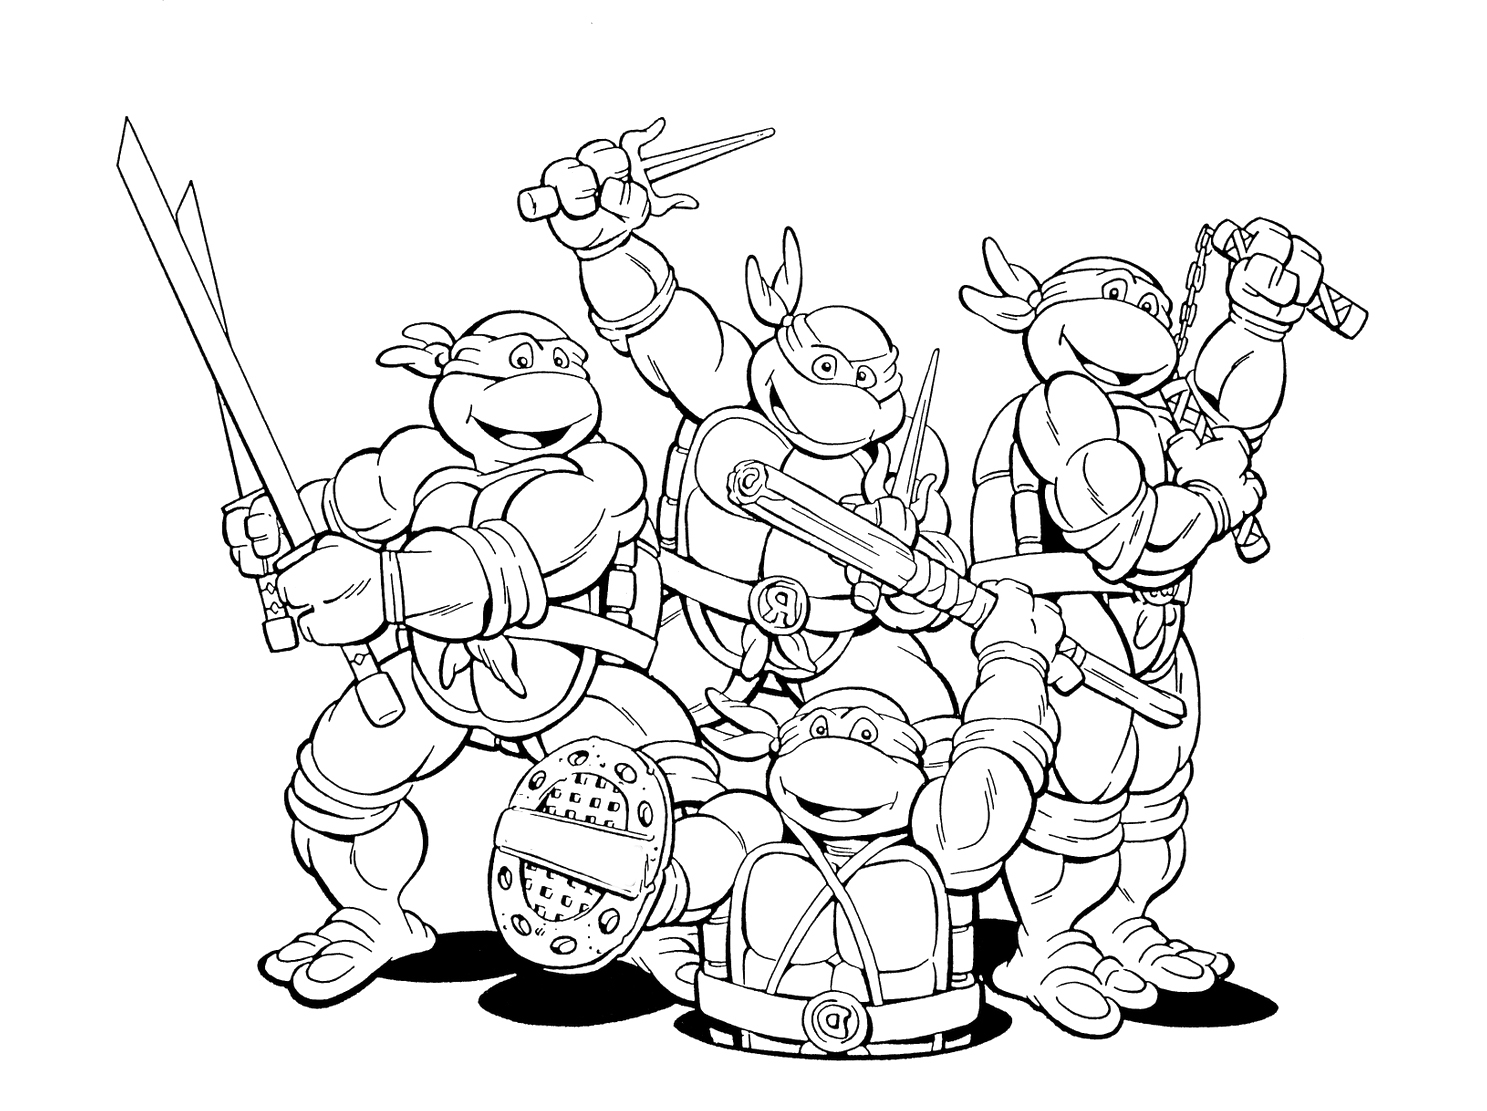 Tmnt Coloring Pages at Free printable colorings